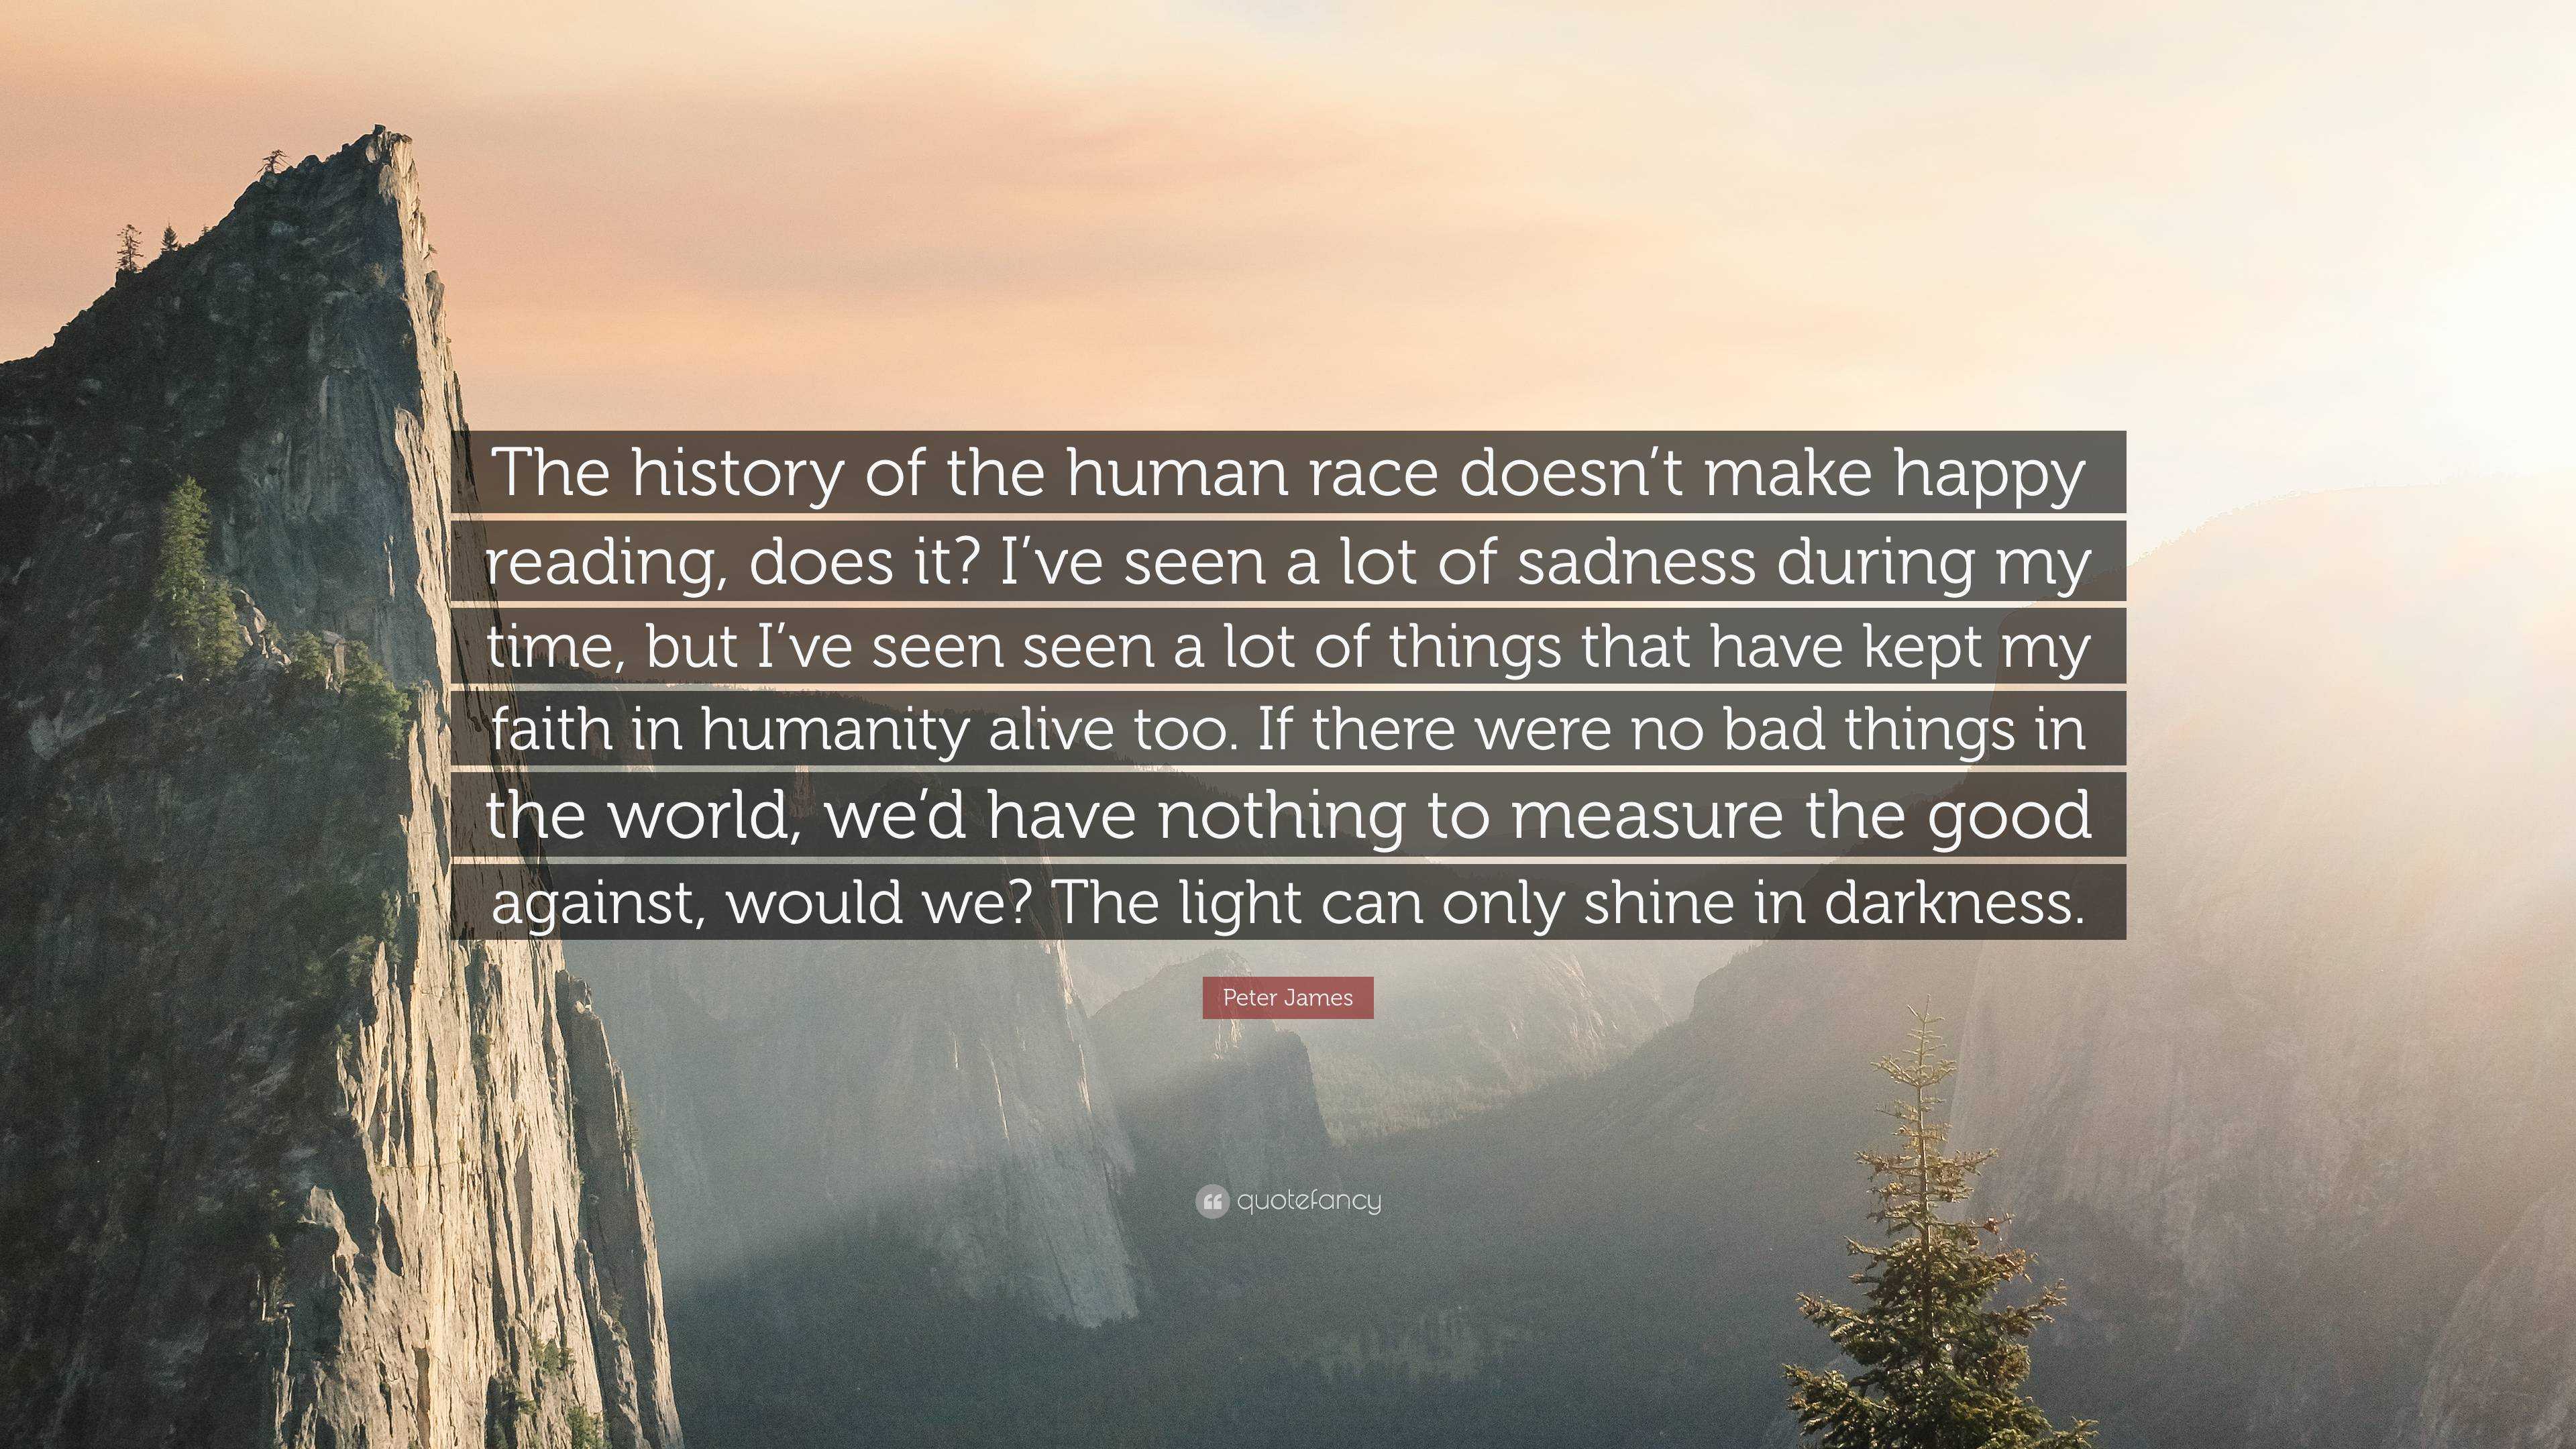 https://quotefancy.com/media/wallpaper/3840x2160/6701284-Peter-James-Quote-The-history-of-the-human-race-doesn-t-make-happy.jpg